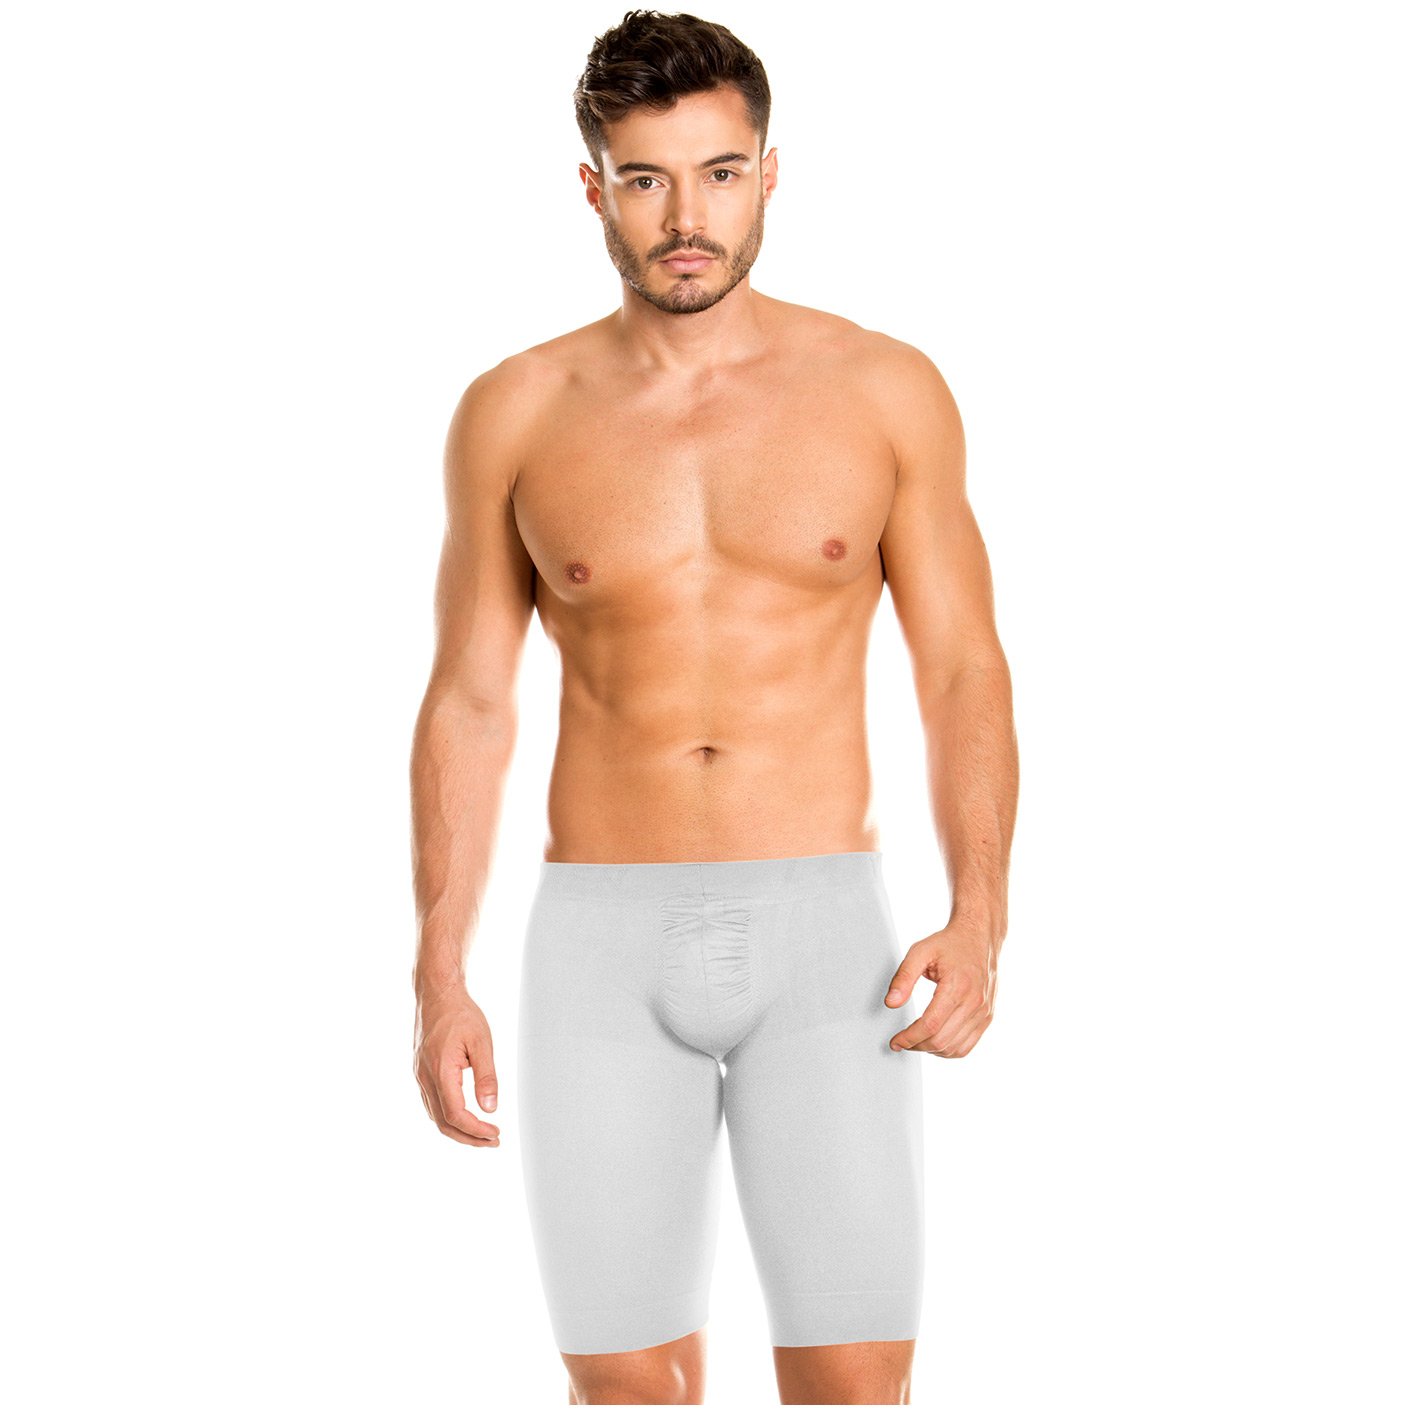 MEN'S GIRDLE BELLYBUSTER with JOCK STRAP